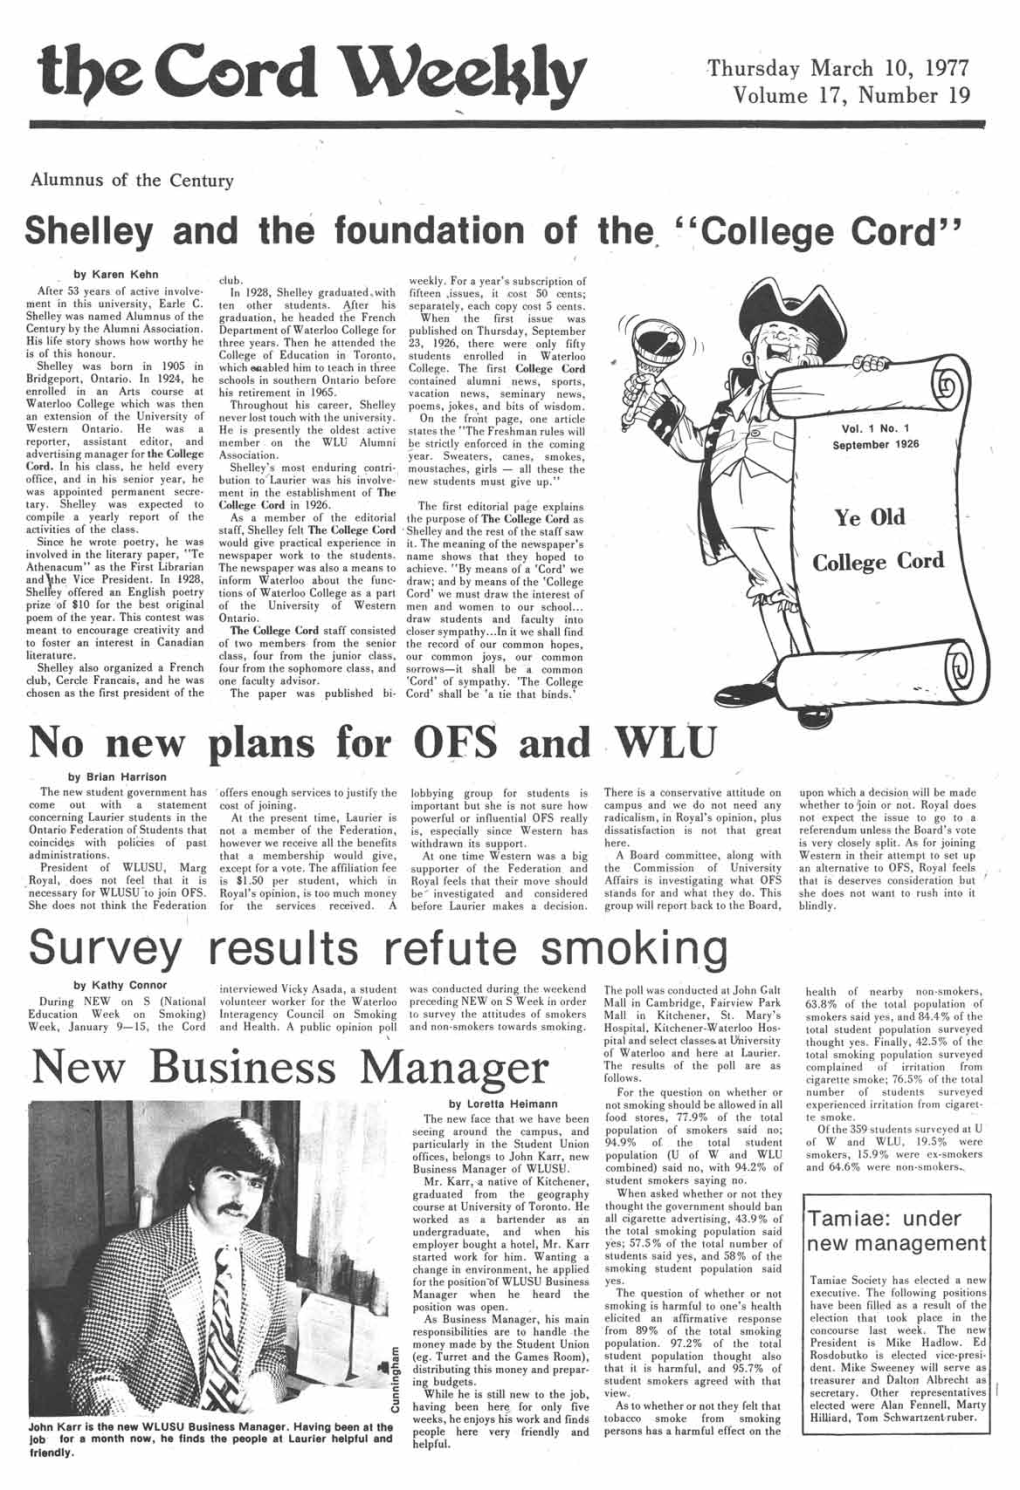 The Cord Weekly (March 10, 1977)